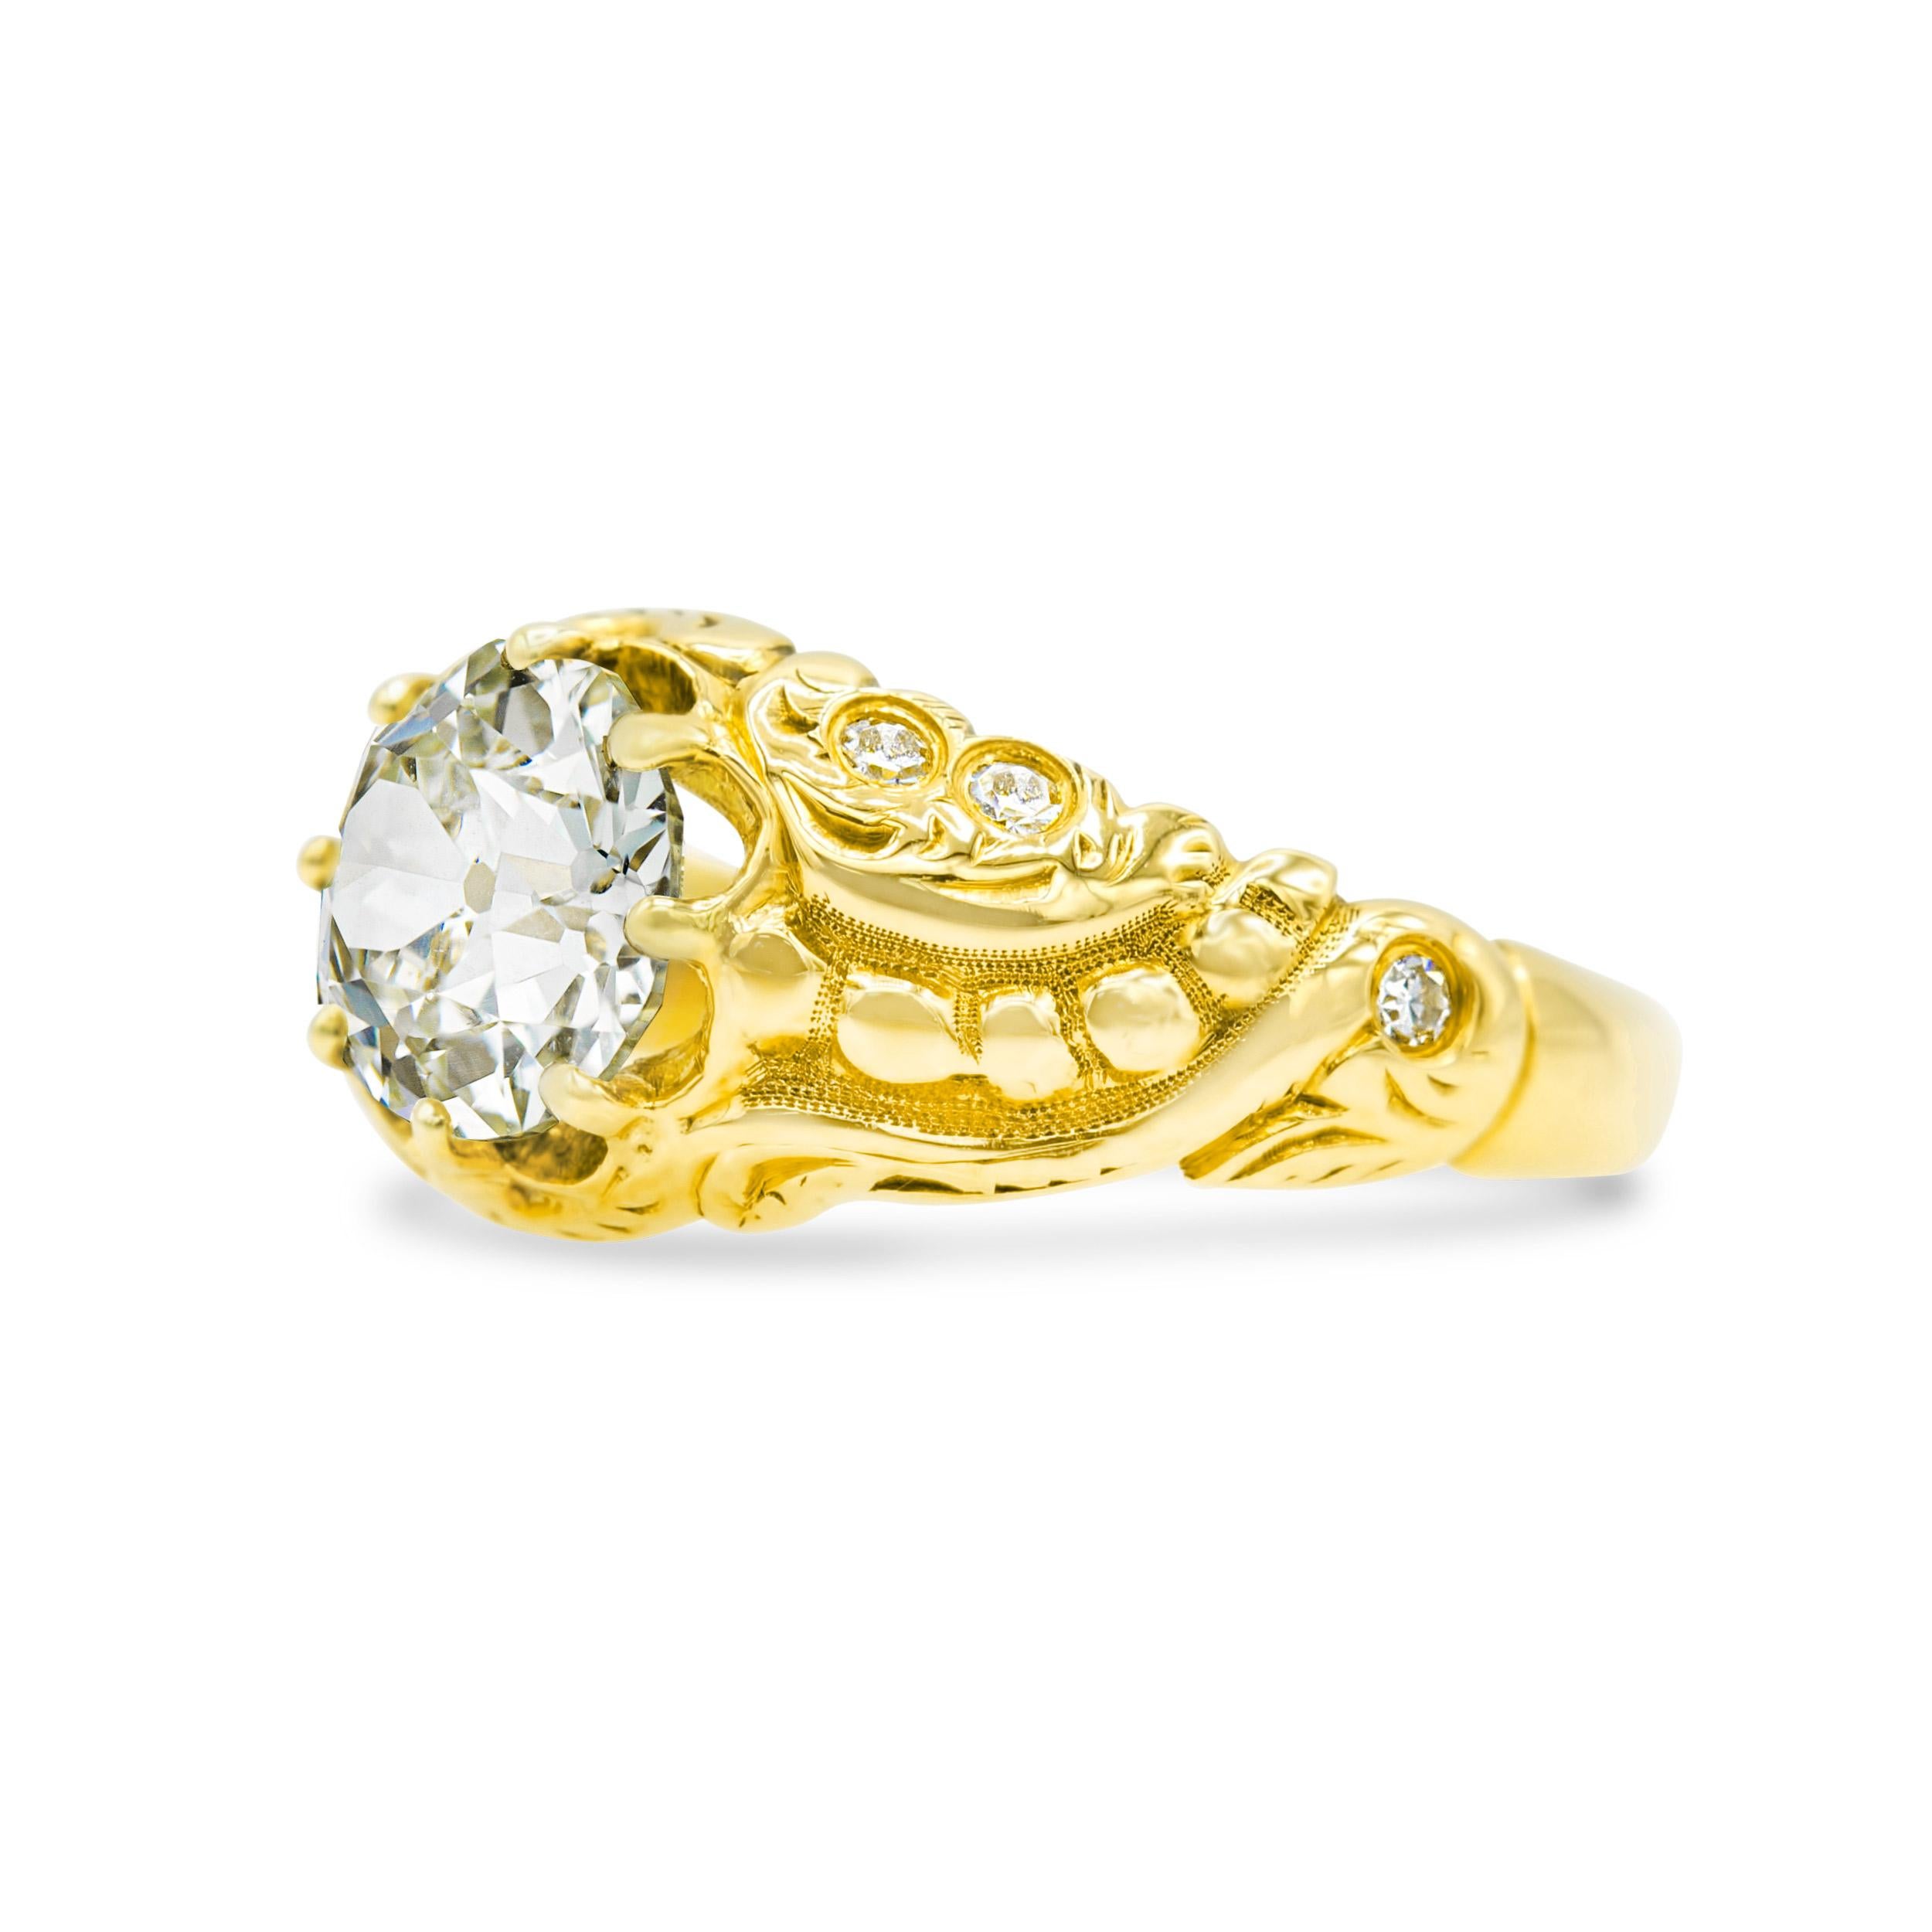 Yellow gold is definitely in style, and you'll be hard-pressed to find a prettier choice than this Victorian-era jewel. A 1.44 carat old European diamond sits at the center surrounded by a swirl motif and hand-engraved ring details. Why we love this